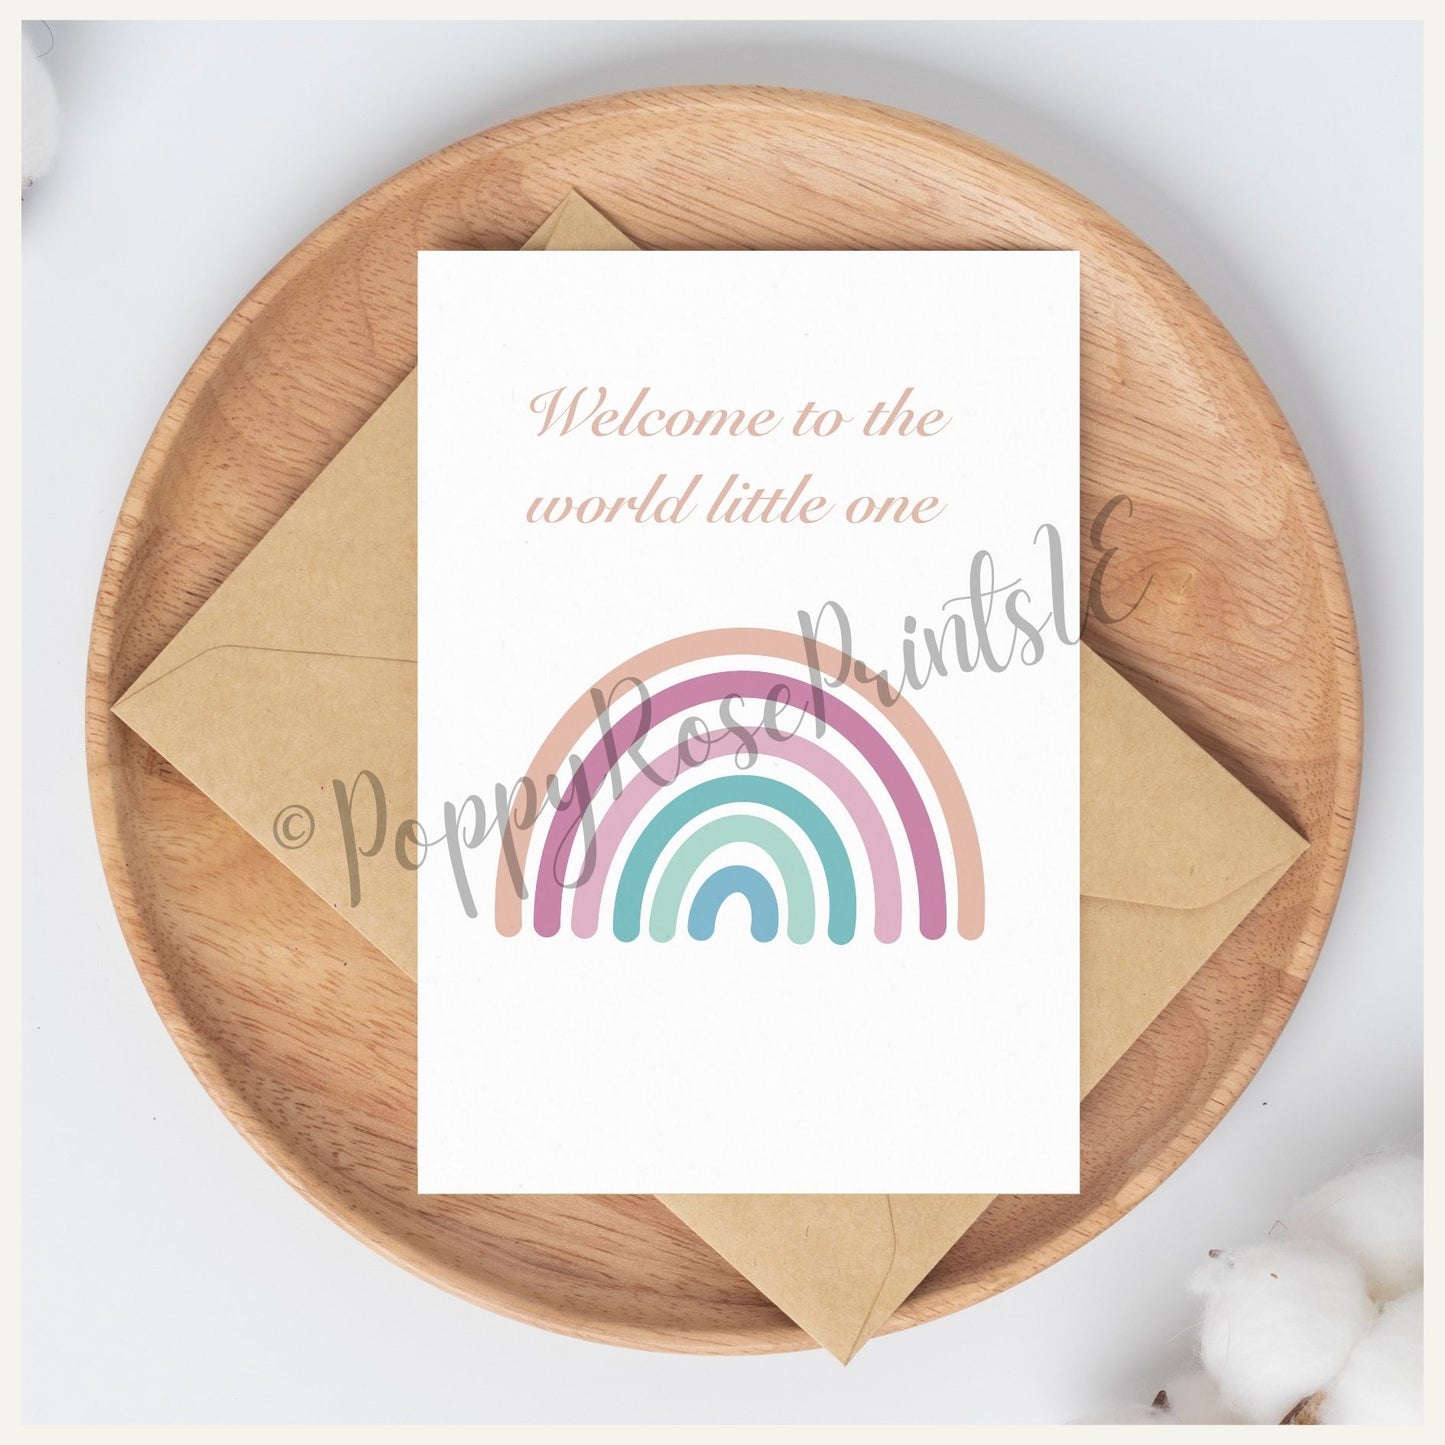 "Welcome to the world little one" - Rainbow Greeting Card